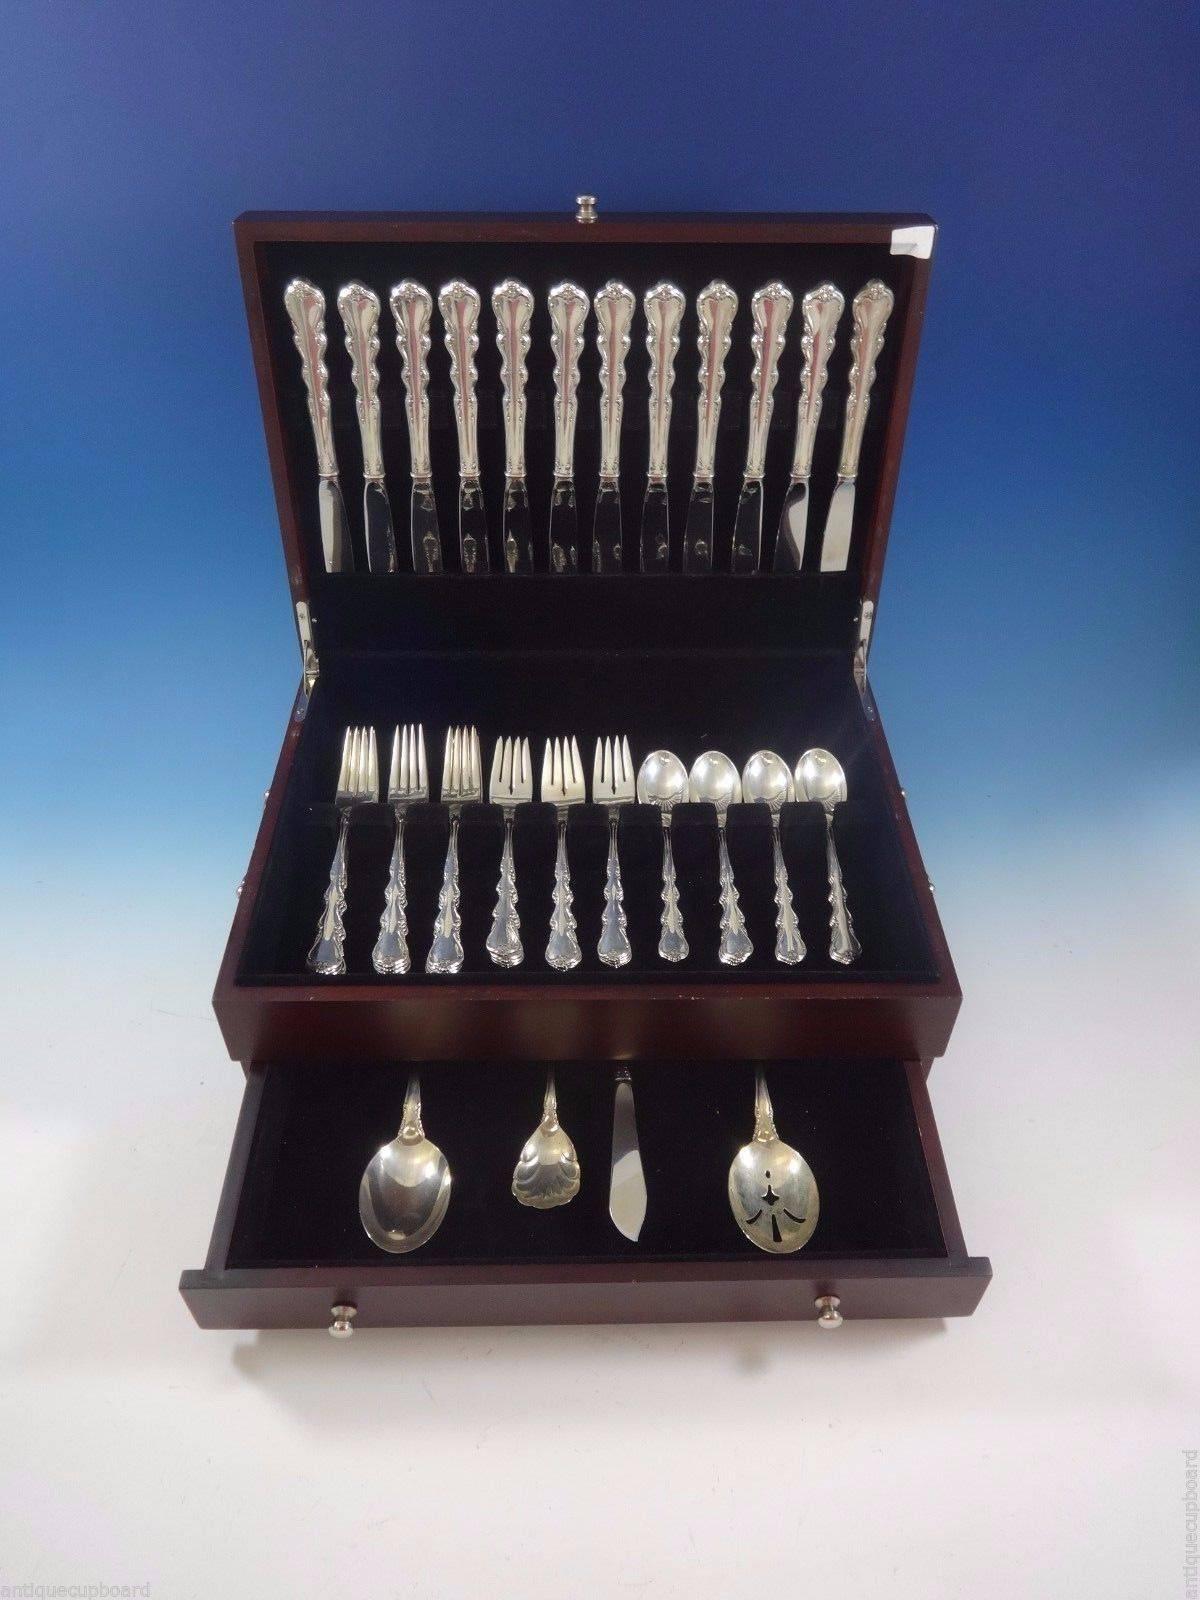 ANGELIQUE BY INTERNATIONAL sterling silver Flatware set - 52 Pieces. This set includes: 

12 KNIVES, 9 1/4